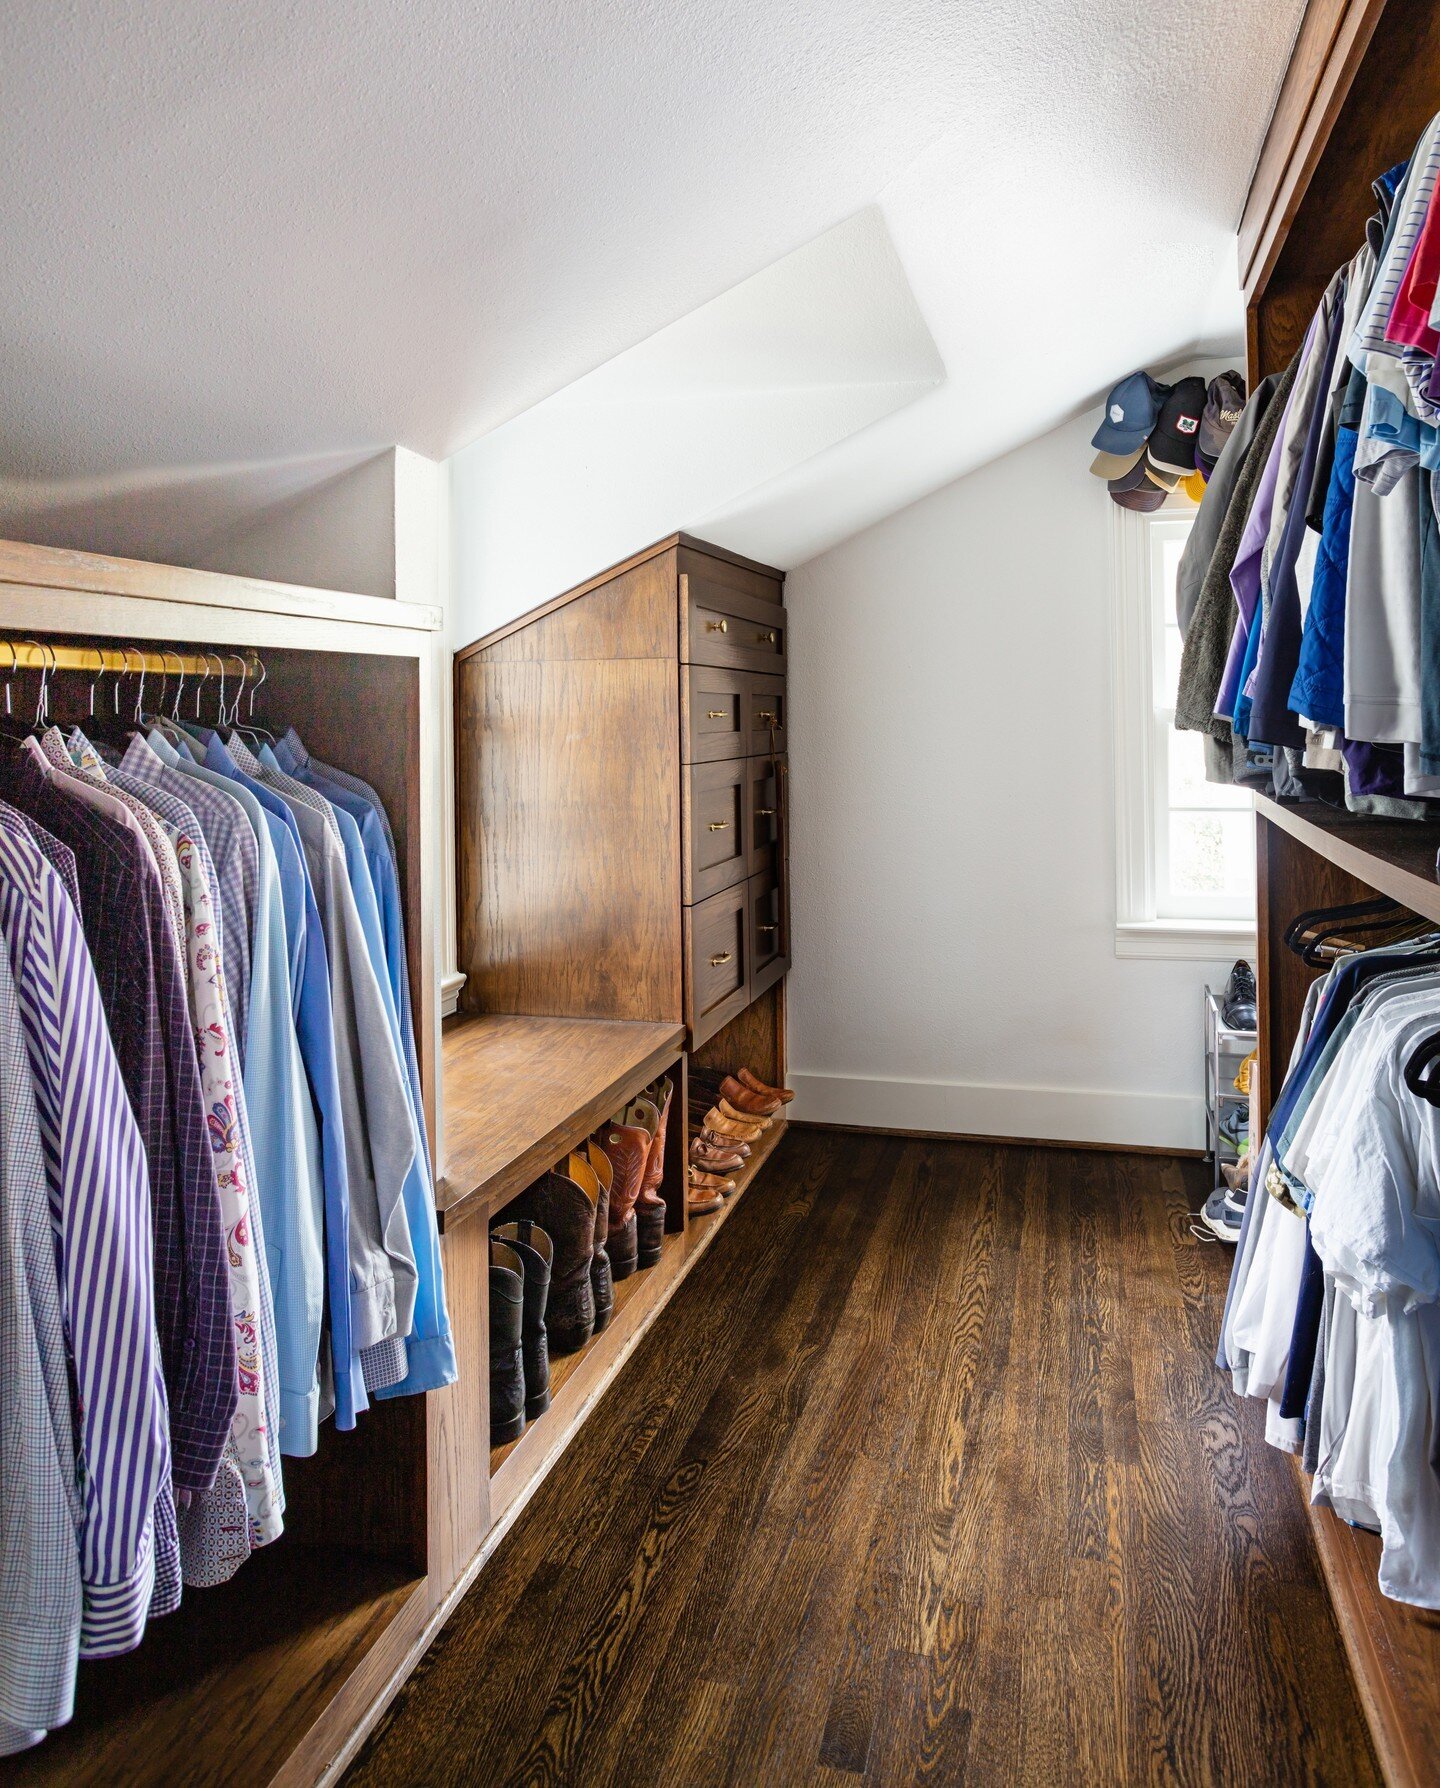 Who said we needed to save beautiful closets for the ladies alone?

Not us! So we built it.

As a part of their primary suite remodel, the Drapers wanted closets that wowed, and we knew just what to do: dark walnut floors that make a statement agains